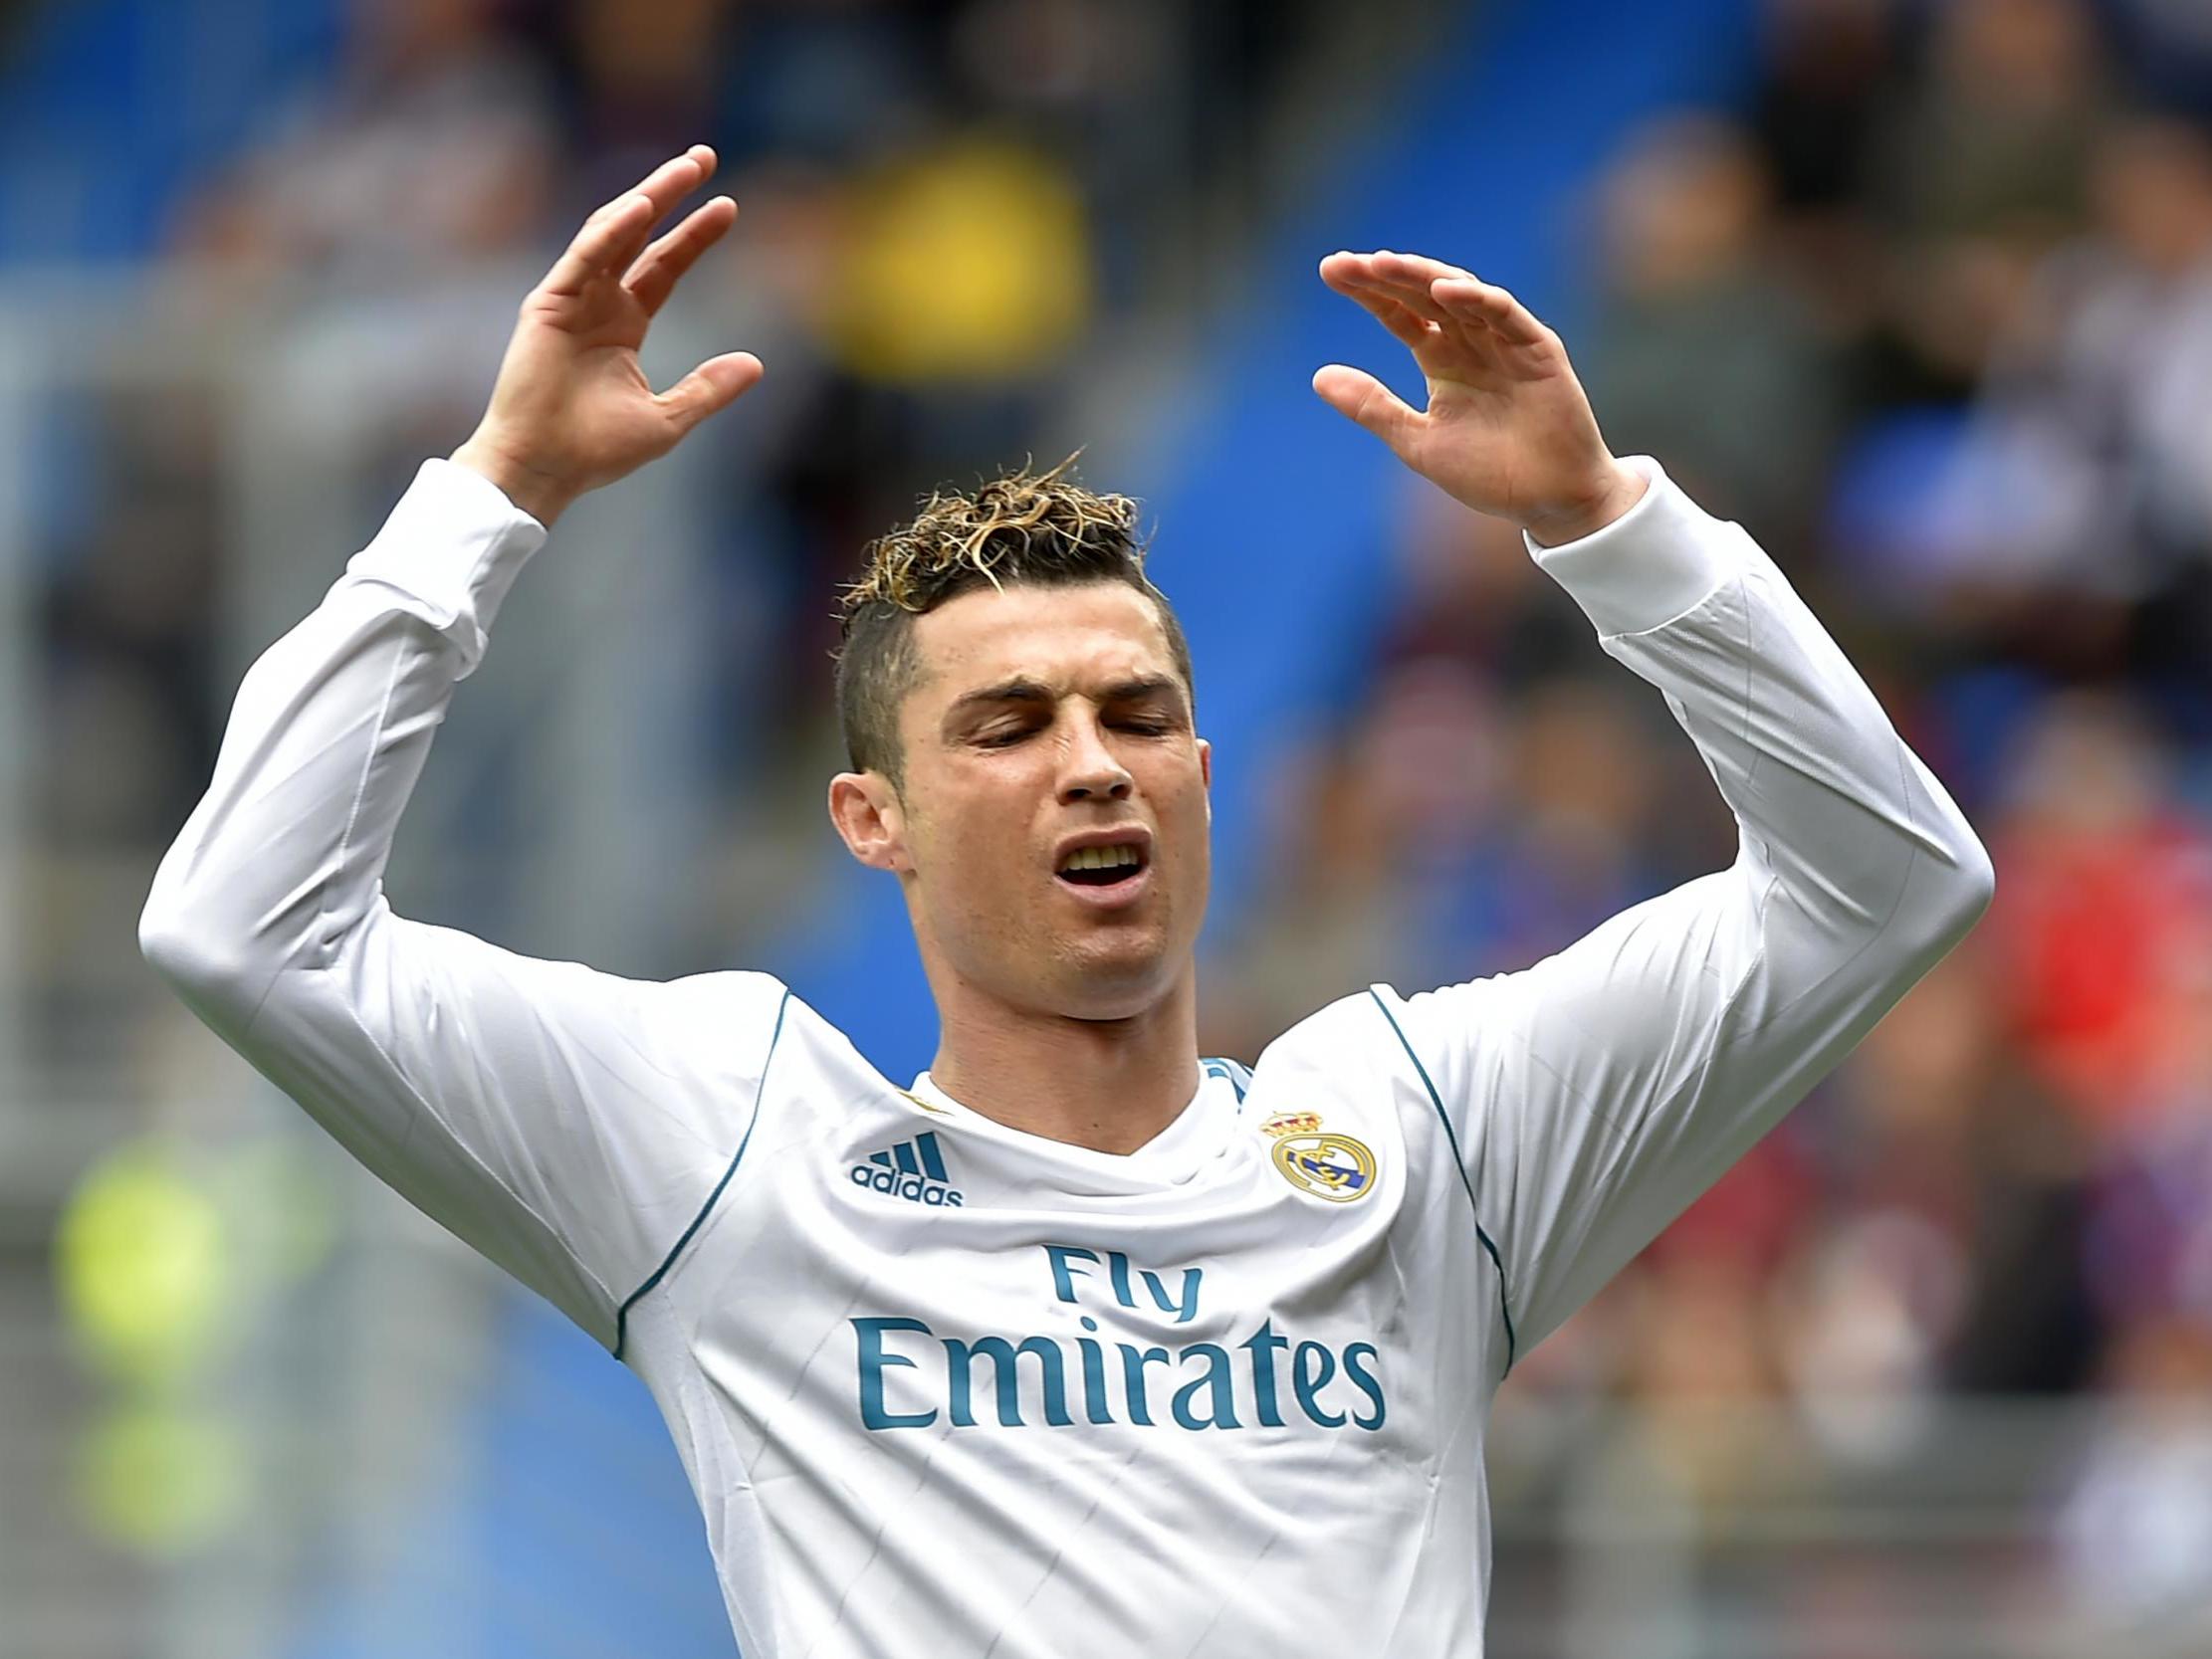 Uefa’s doping officers reportedly lost control of proceedings as Ronaldo complained 'that he was always selected' for testing